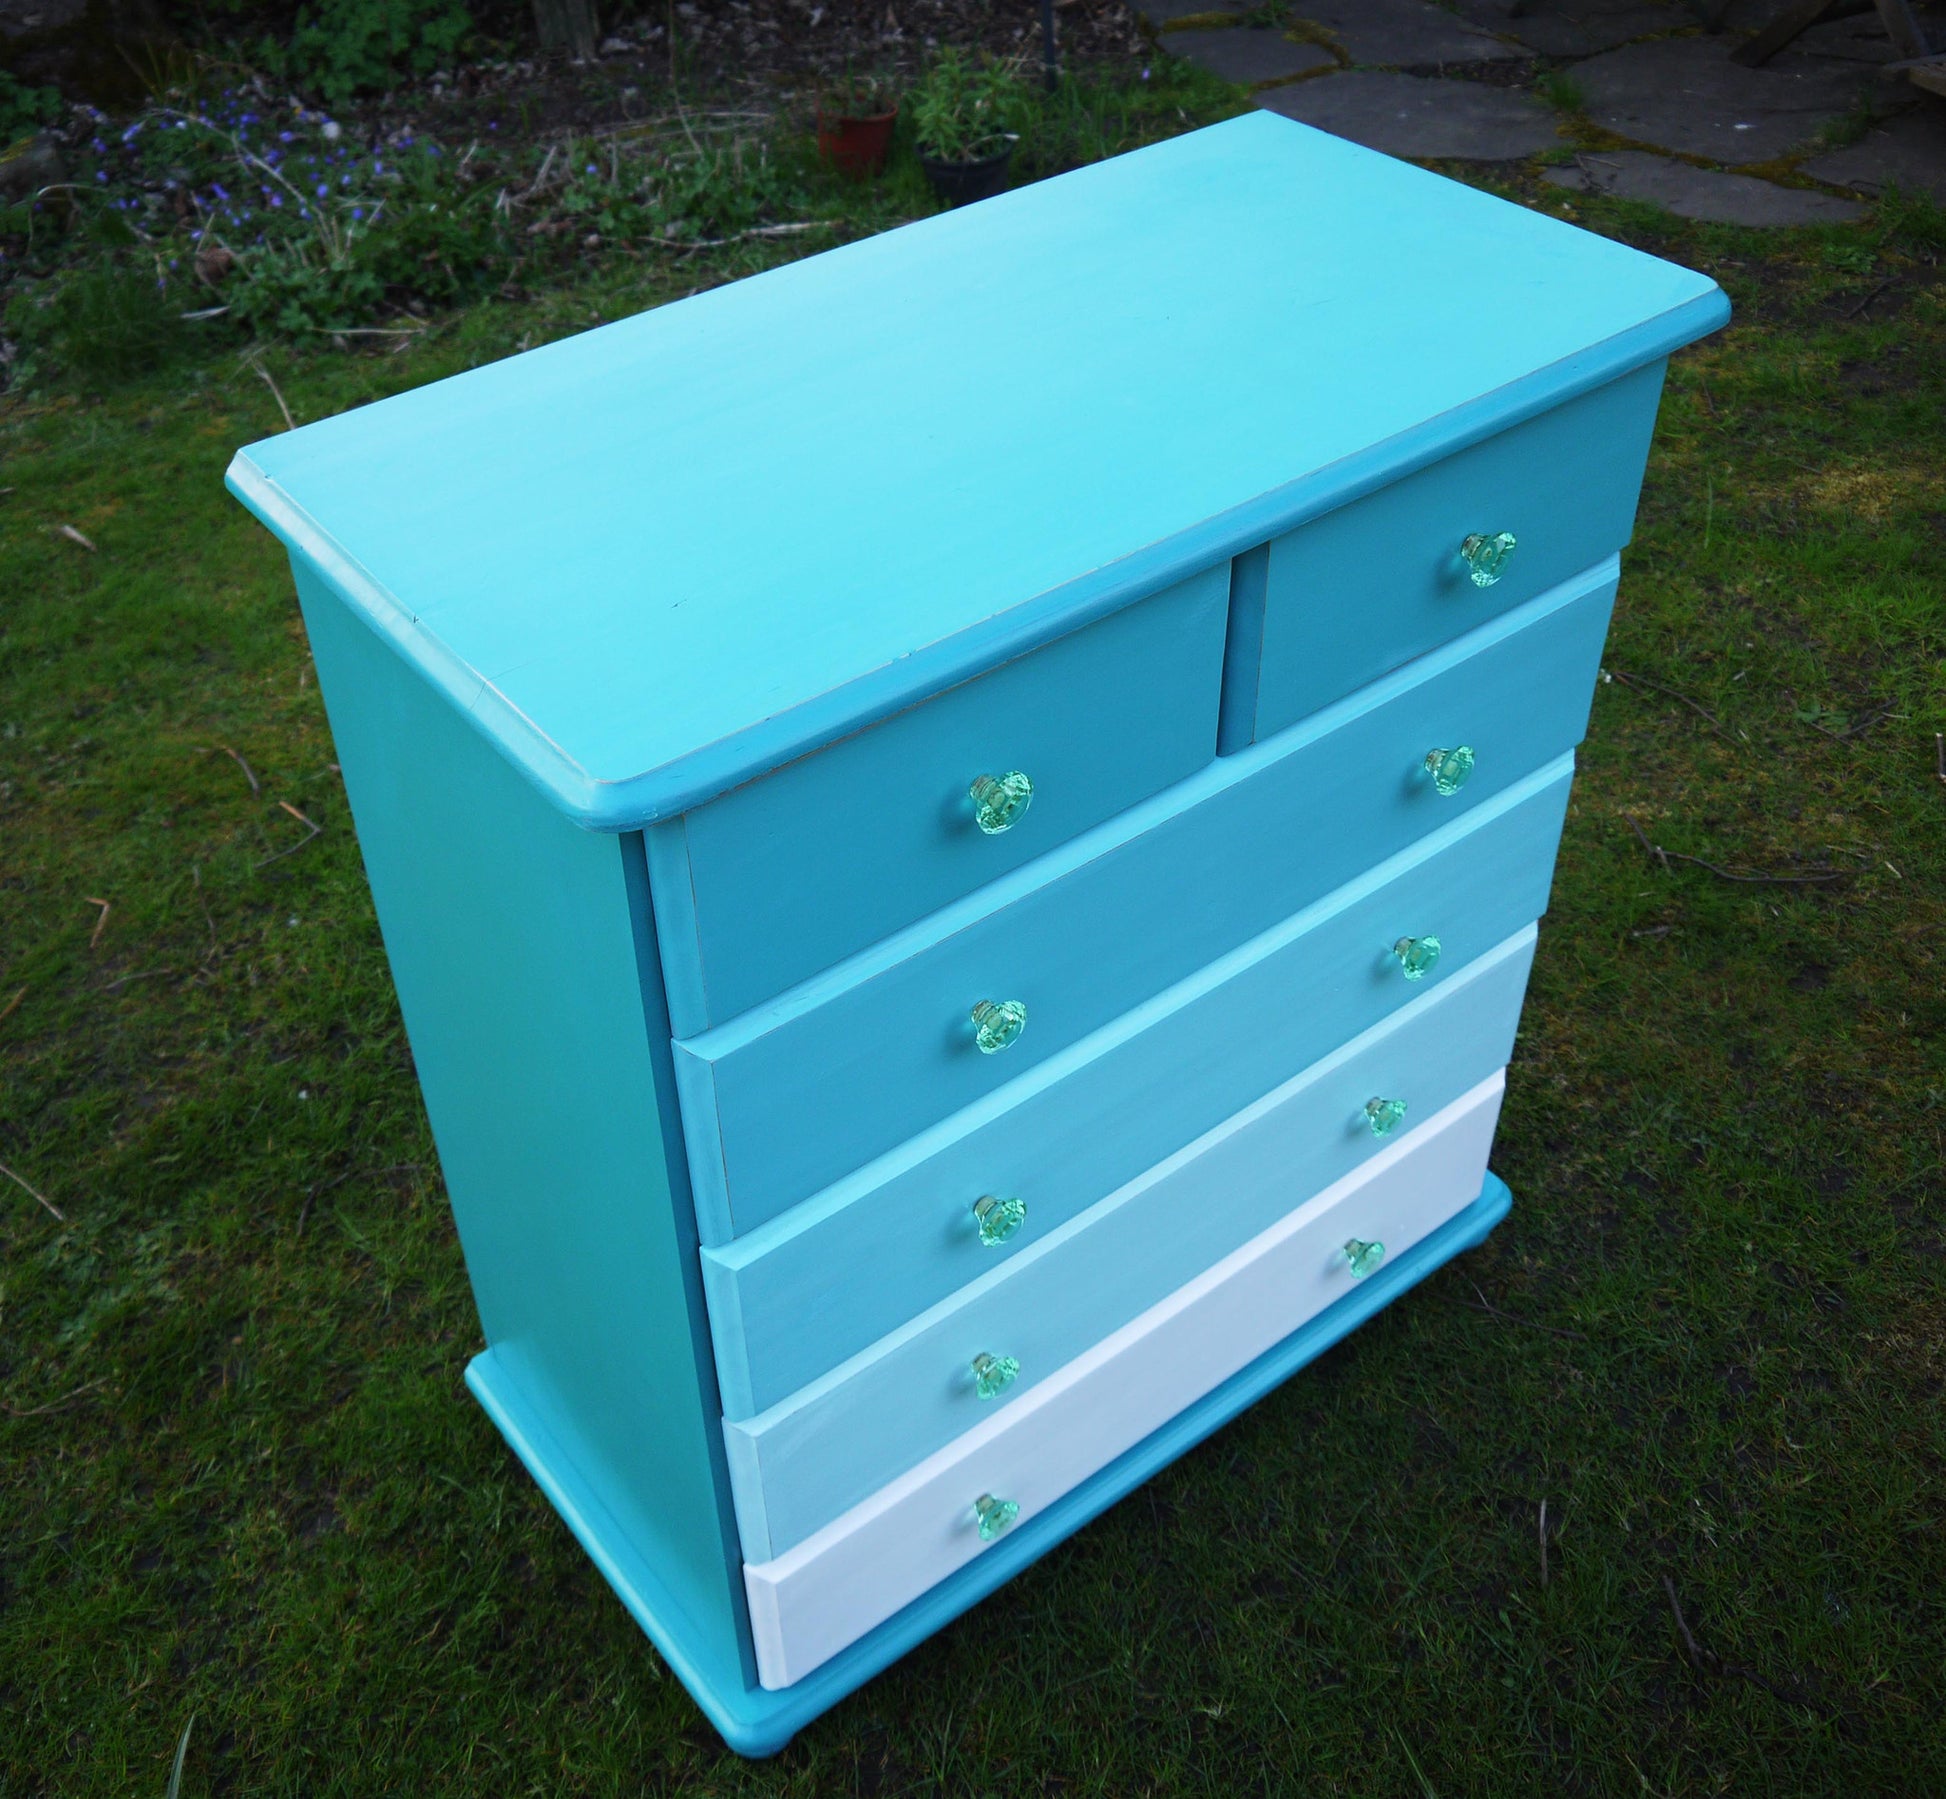 Vintage chest of drawers handpainted in shades of Teal with turqouise crystal handles